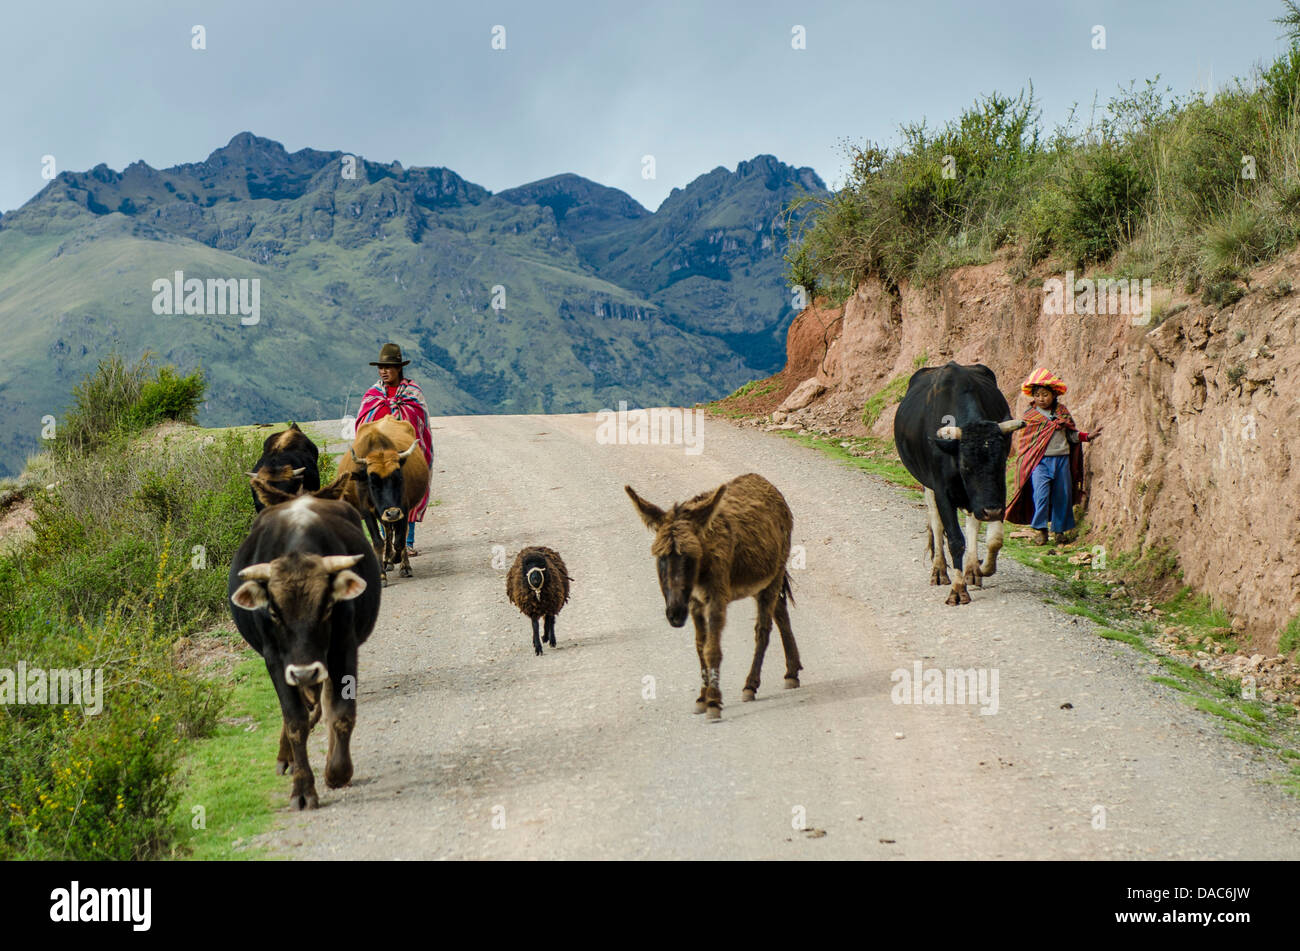 Inca Incan woman child girl with cattle cows livestock on road in Andes mountains above the Sacred Valley near Maras, Peru. Stock Photo